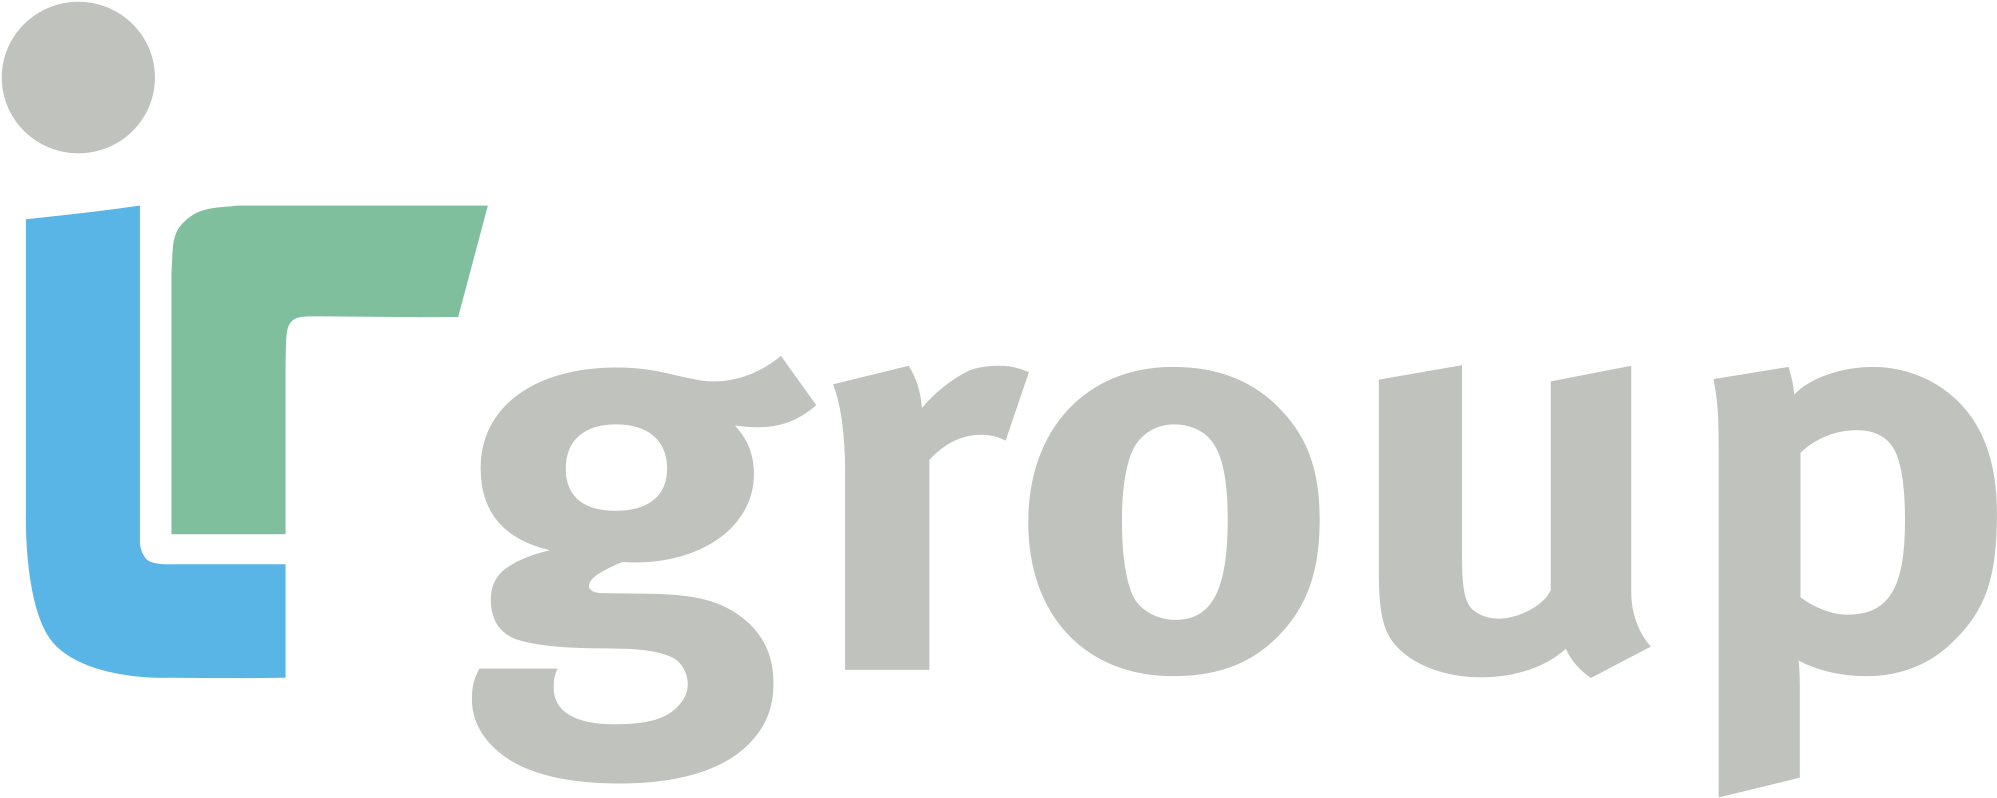 Is Group Logo Png Transparent - Graphic Design (2400x2400)